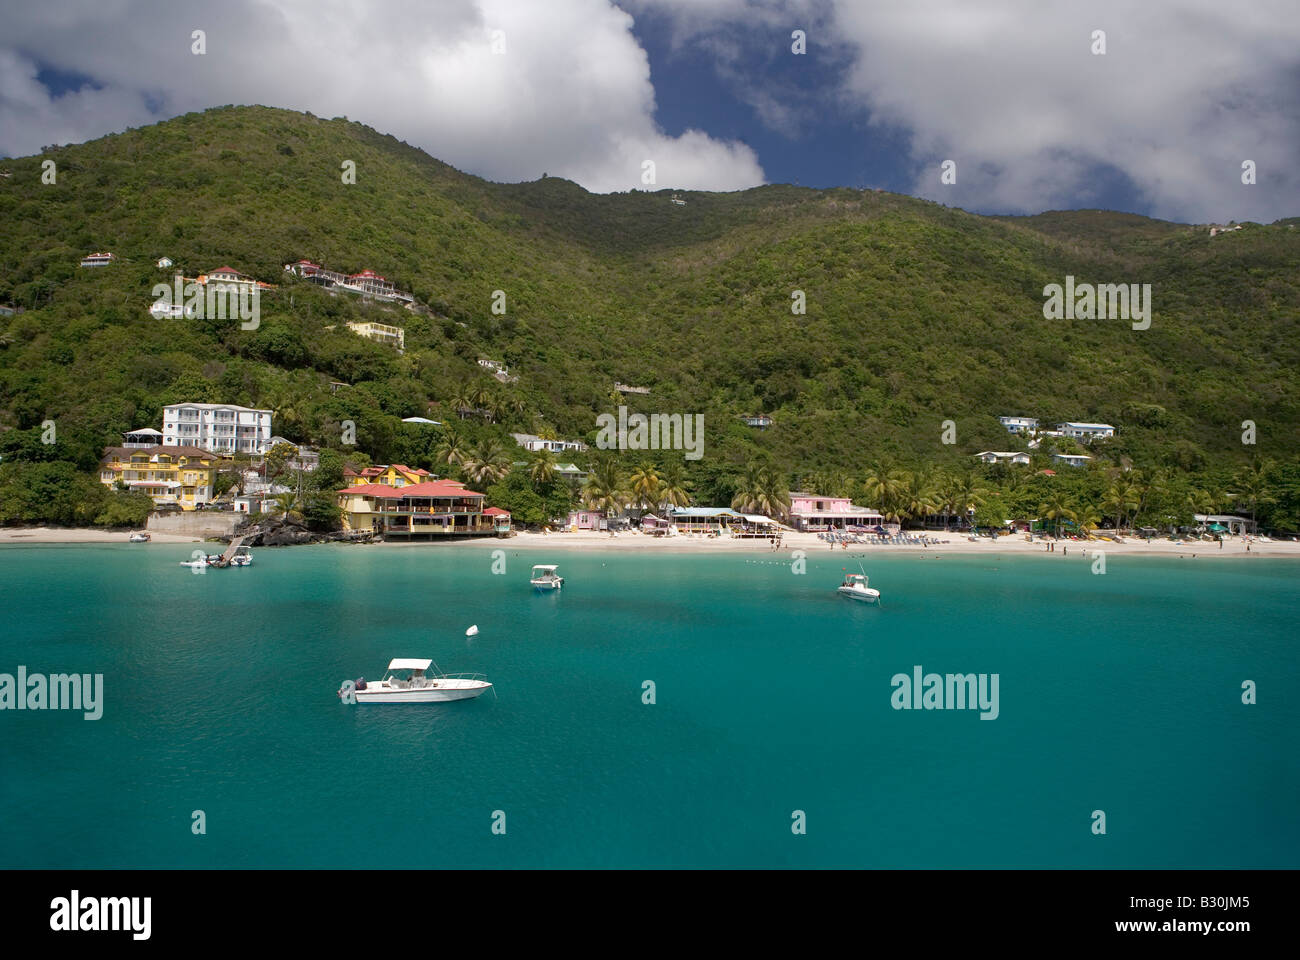 The long beautiful beach at Cane Garden Bay on the island of Tortola in the British Virgin Islands. Stock Photo